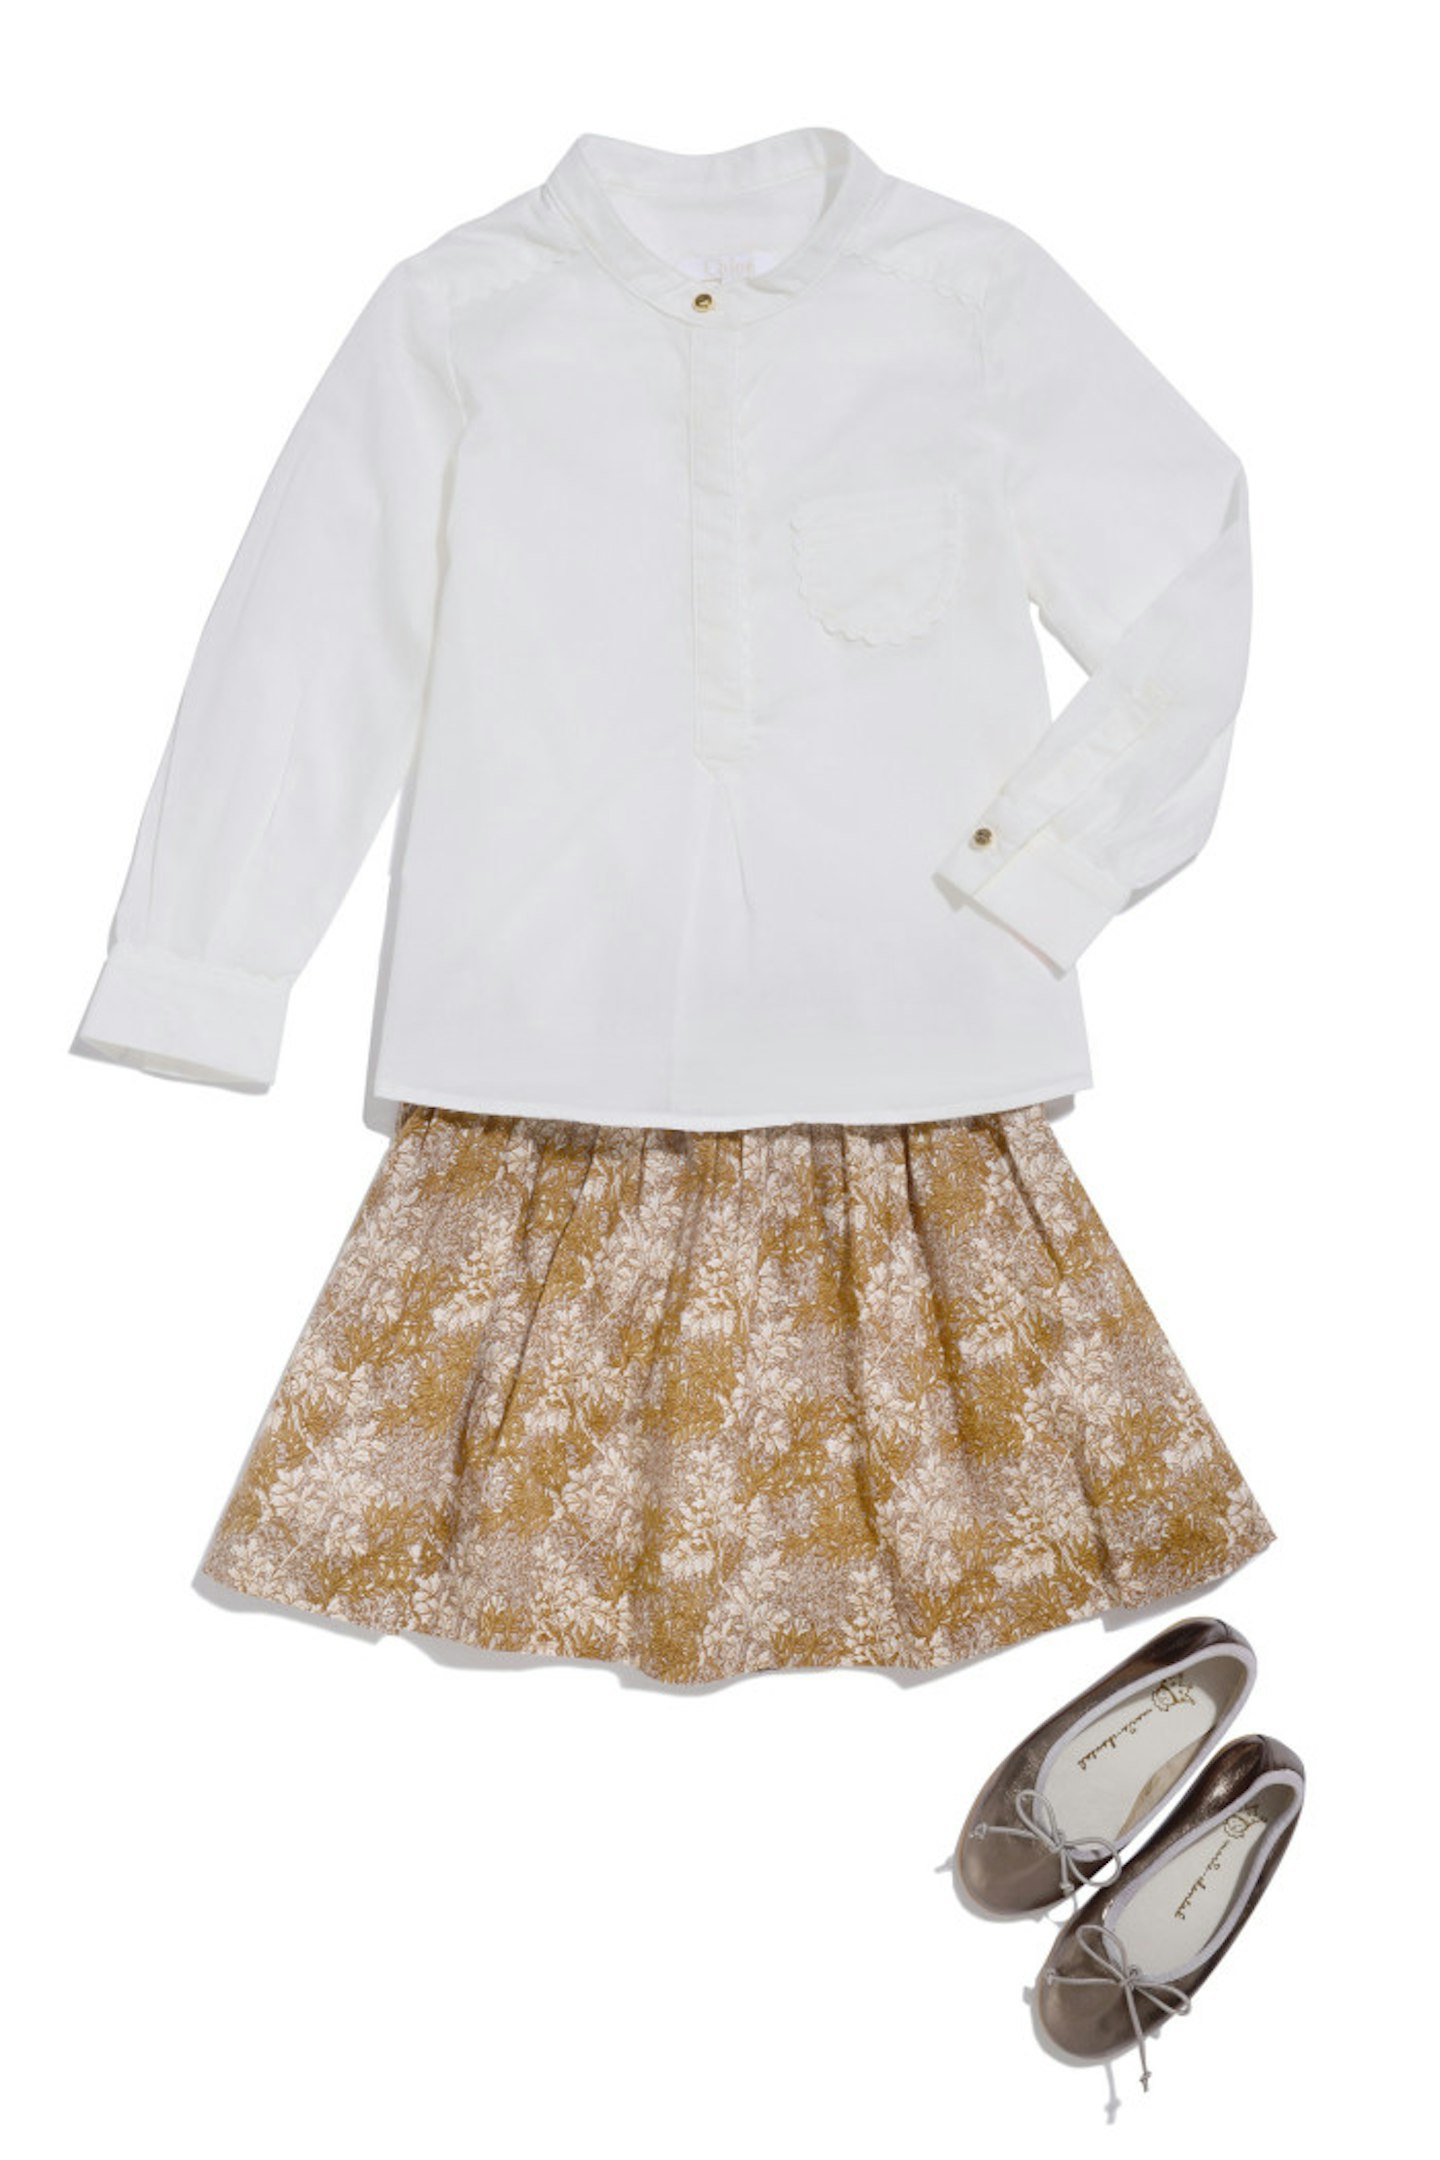 Marie Chantal gold pumps with a Brown Caramel Baby & Child skirt